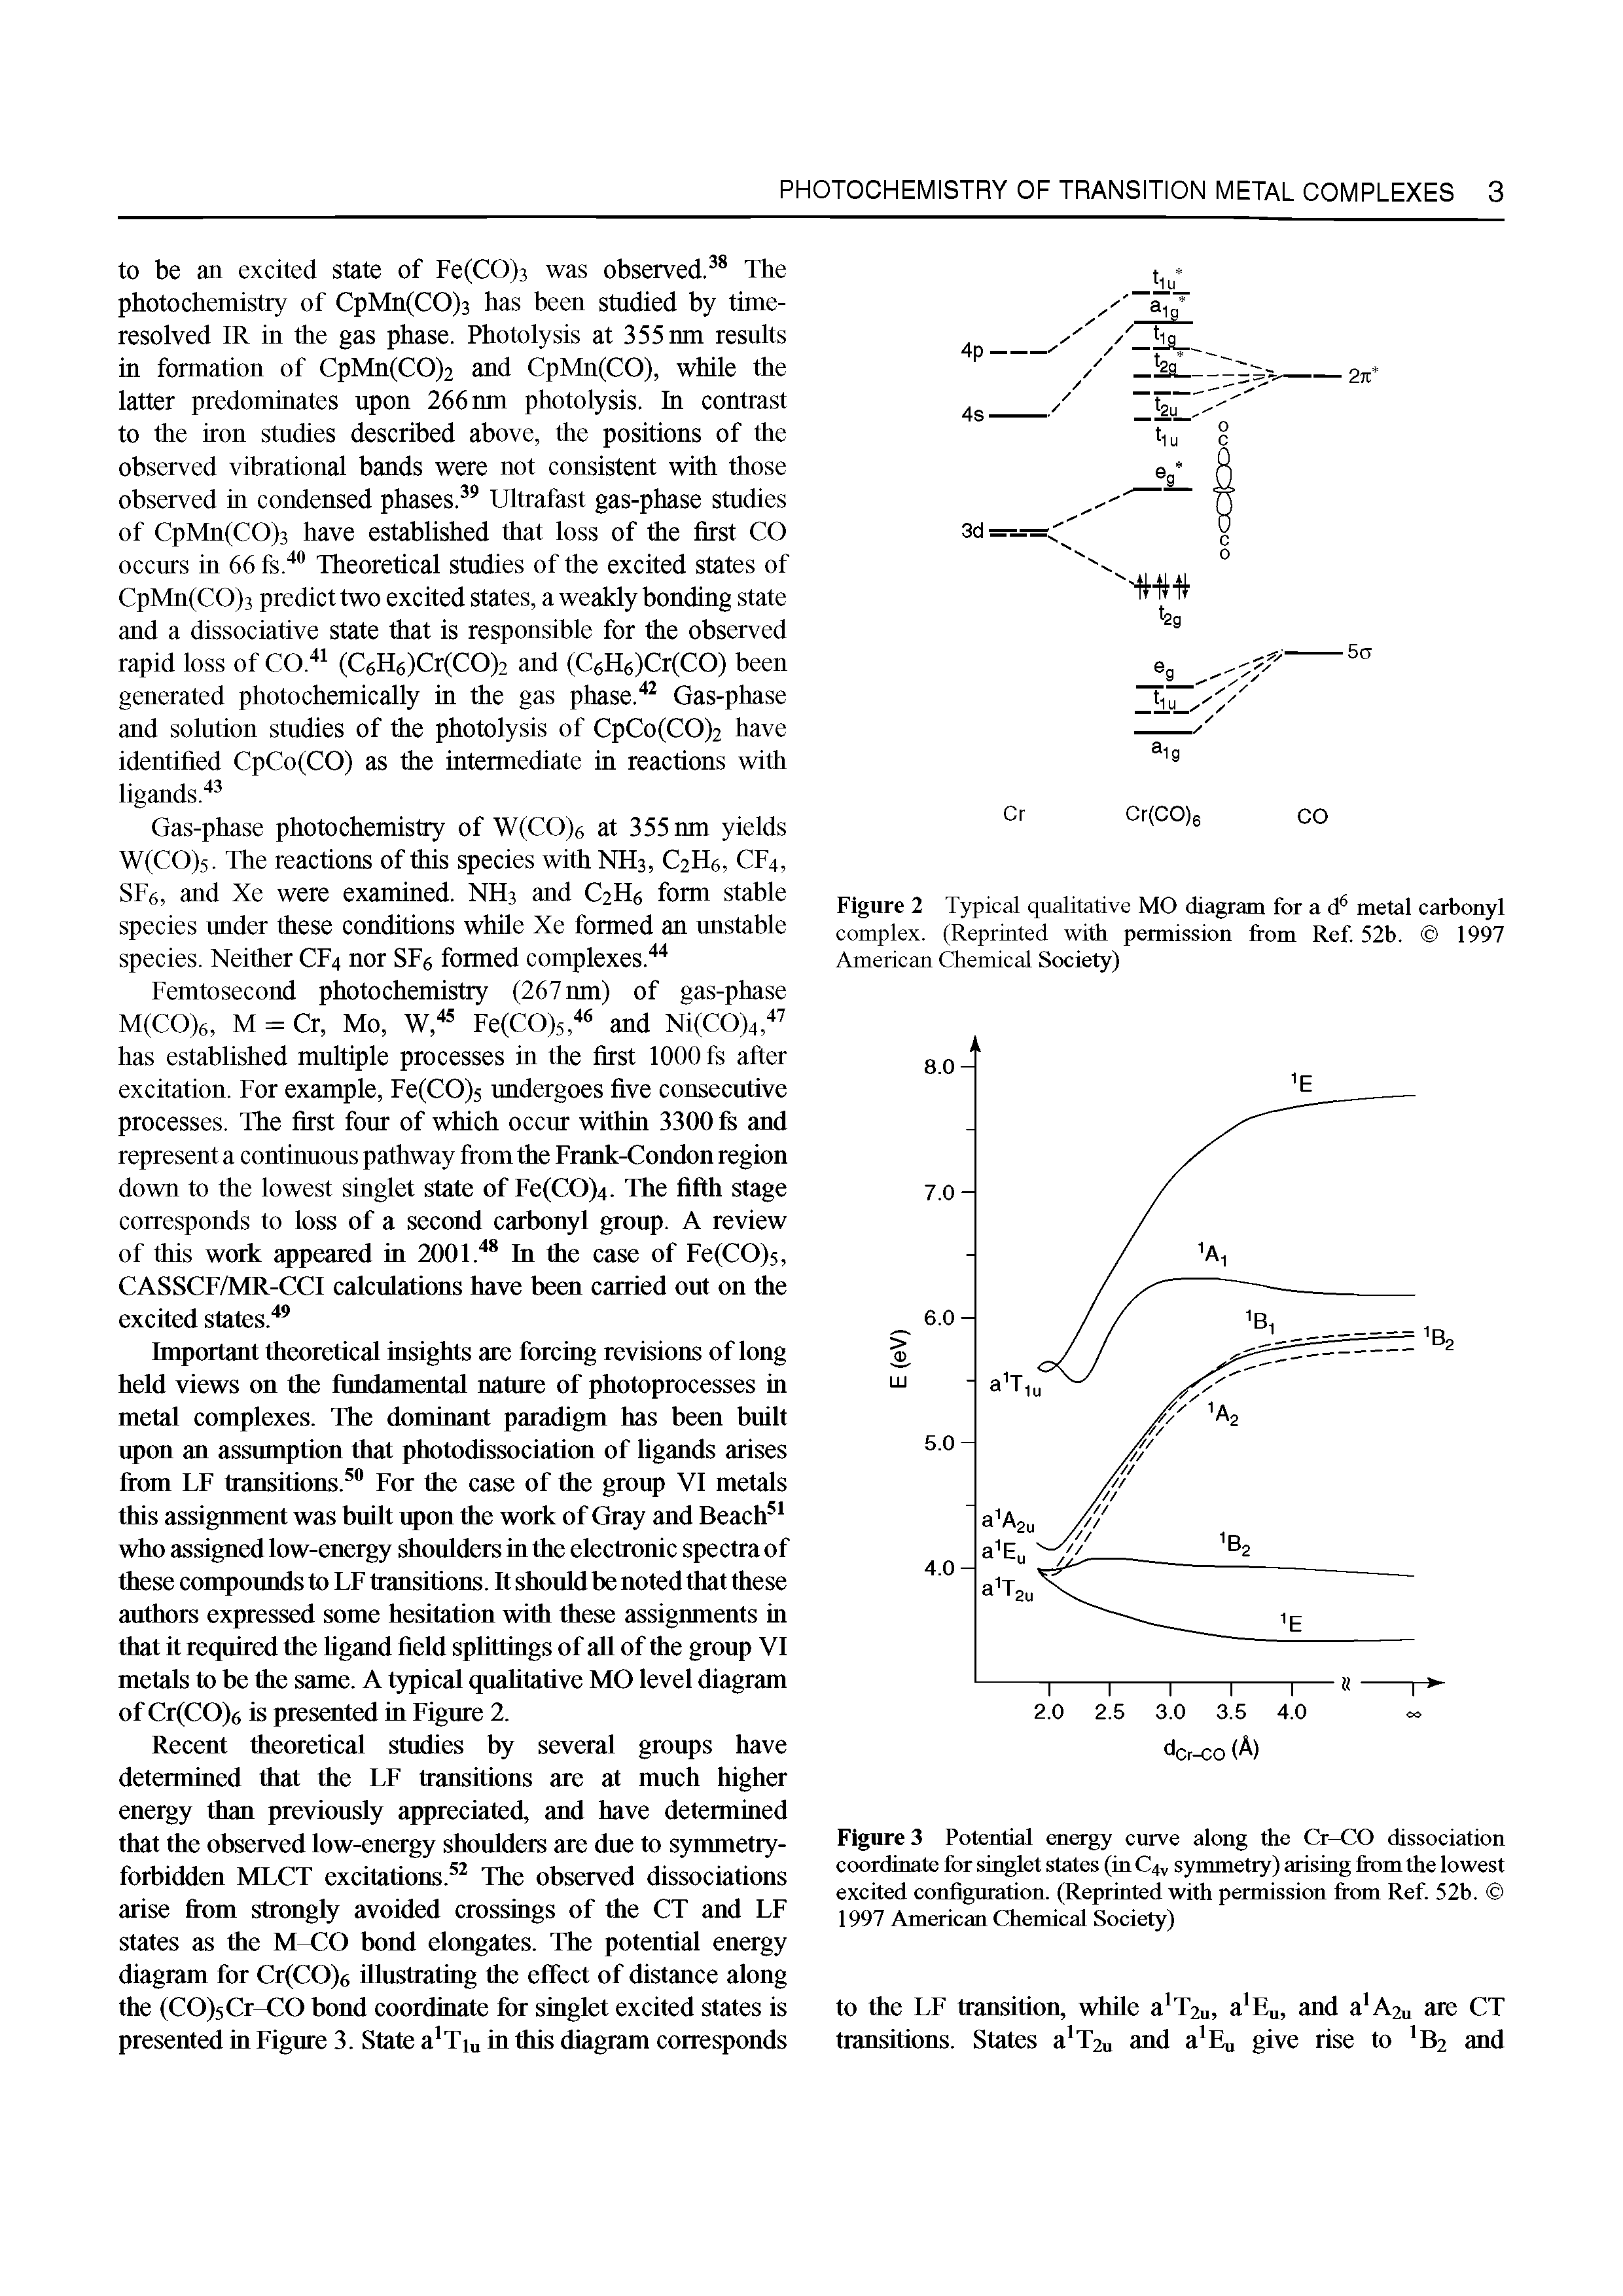 Figure 3 Potential energy curve along the Cr-CO dissociation coordinate for singlet states (in C4V symmetry) arising from the lowest excited configuration. (Reprinted with permission from Ref. 52b. 1997 American Chemical Society)...